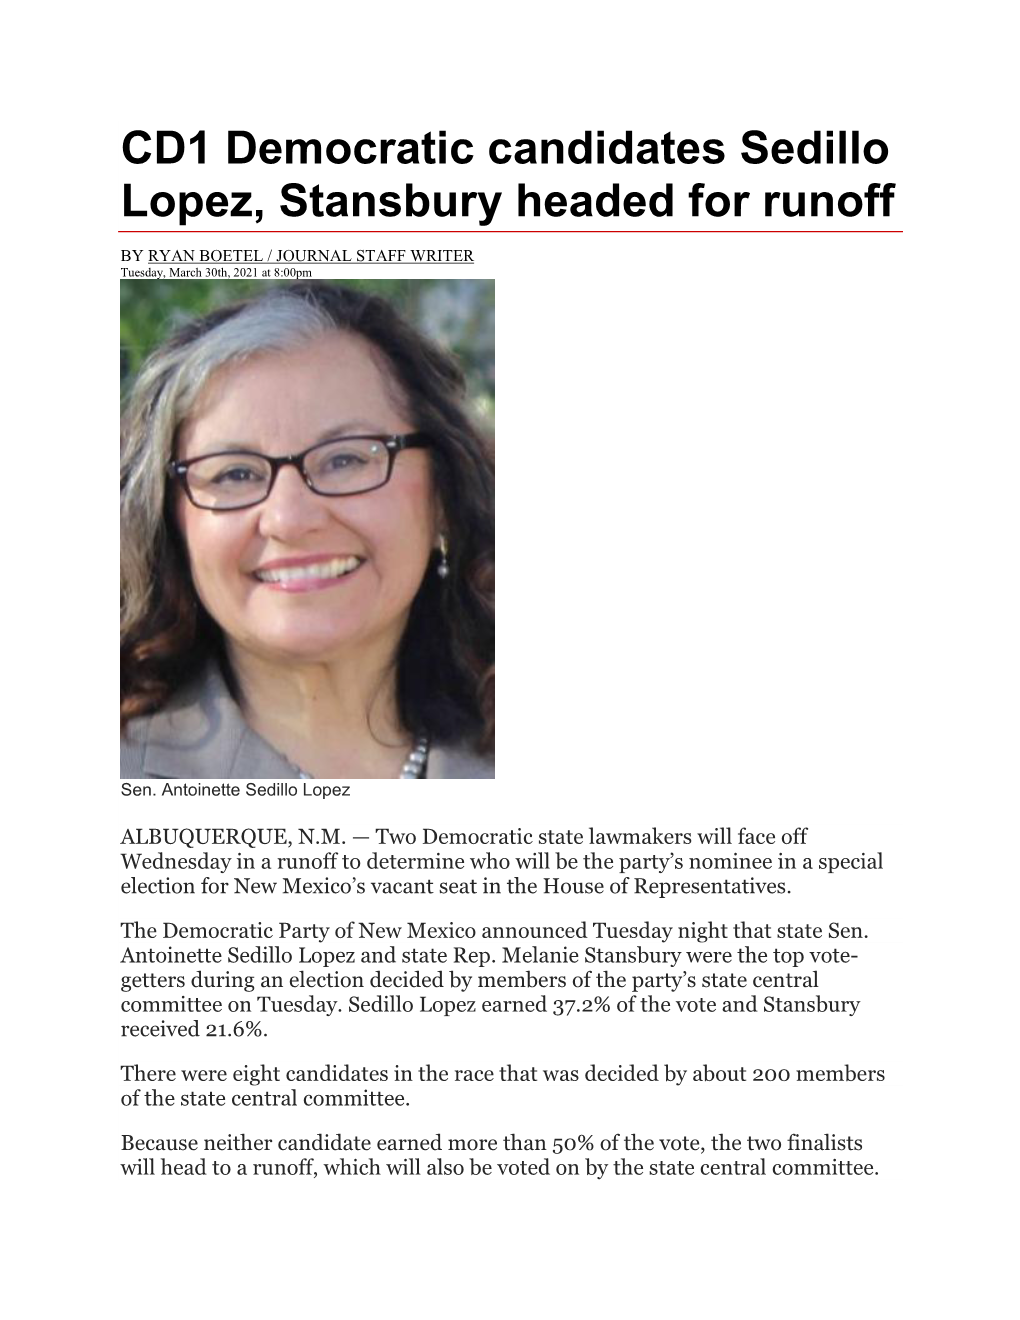 CD1 Democratic Candidates Sedillo Lopez, Stansbury Headed for Runoff by RYAN BOETEL / JOURNAL STAFF WRITER Tuesday, March 30Th, 2021 at 8:00Pm